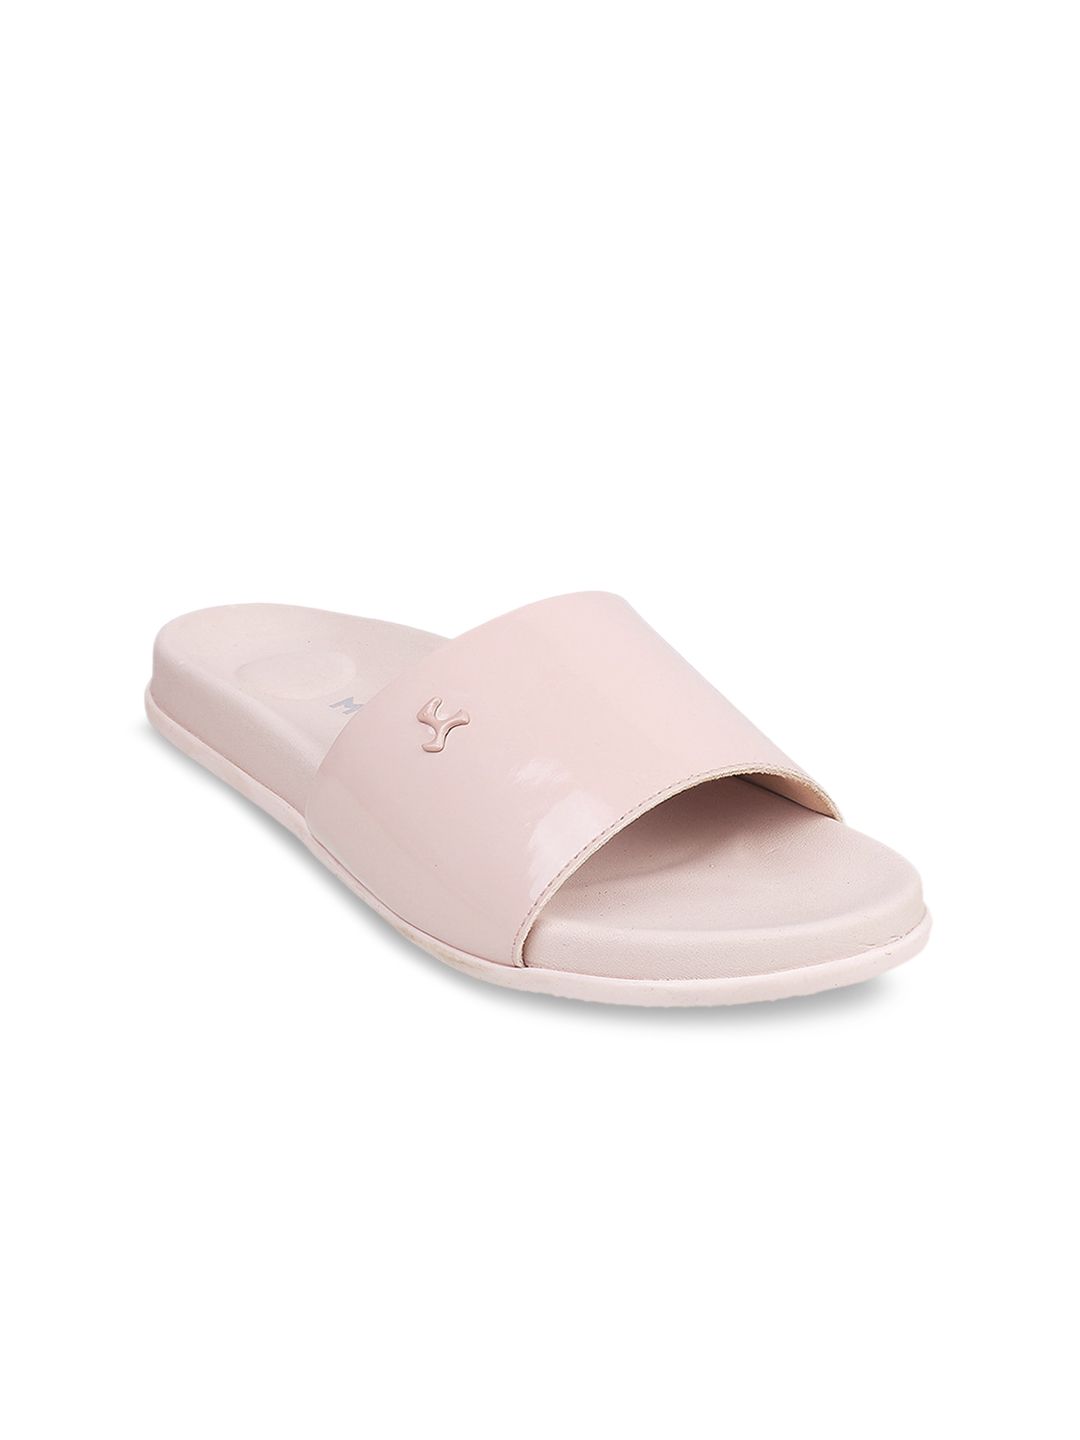 Mochi Women Pink Solid Sliders Price in India